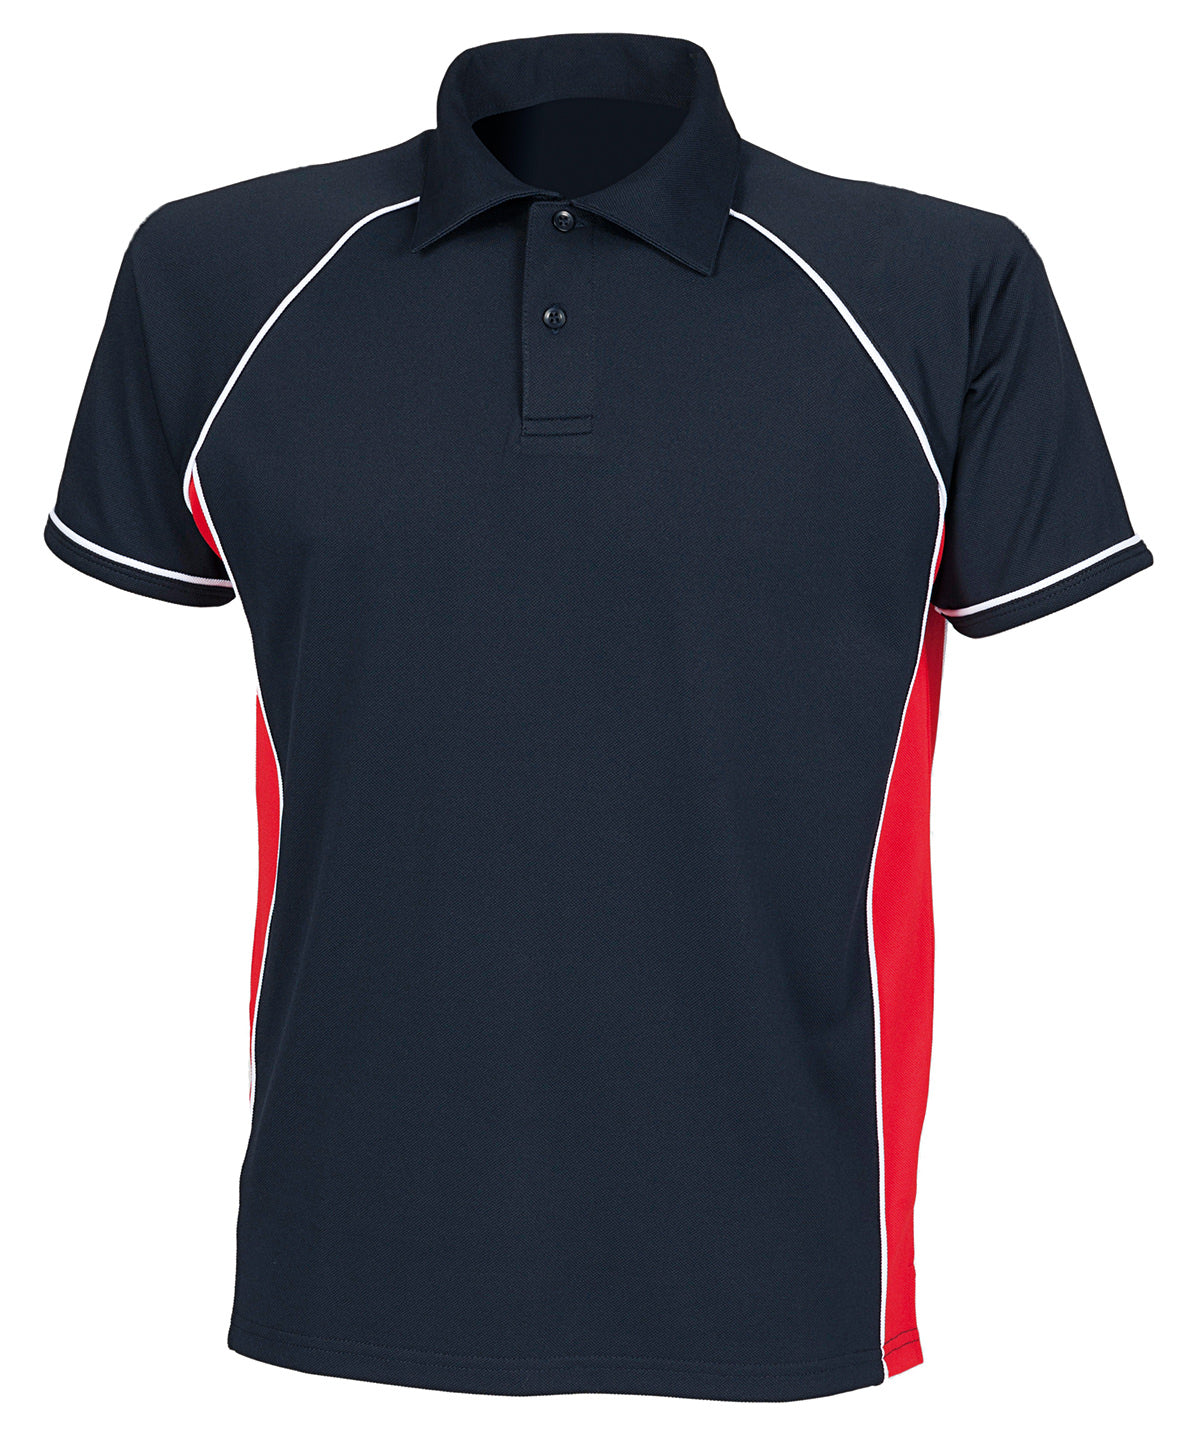 Personalised Polo Shirts - Black Finden & Hales Piped performance polo